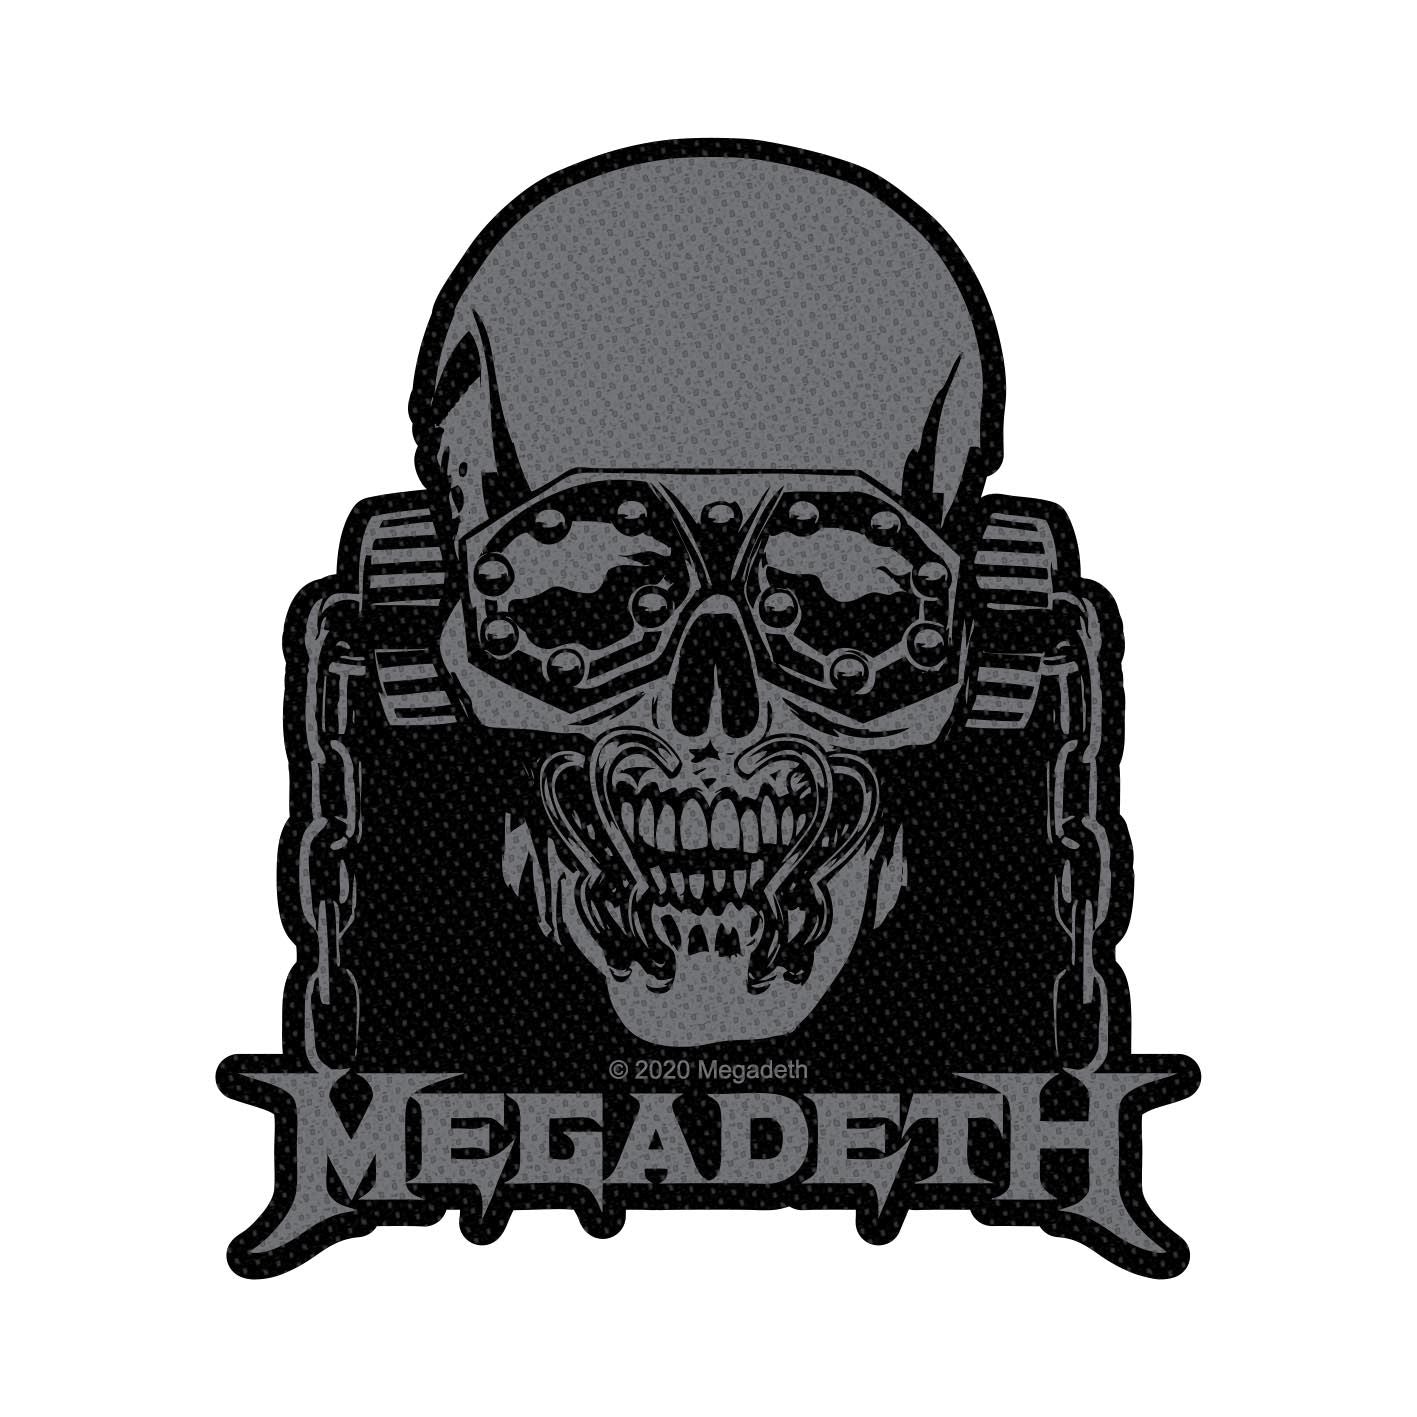 Megadeth - Vic Rattlehead Cut-Out (100mm x 85mm) Sew-On Patch